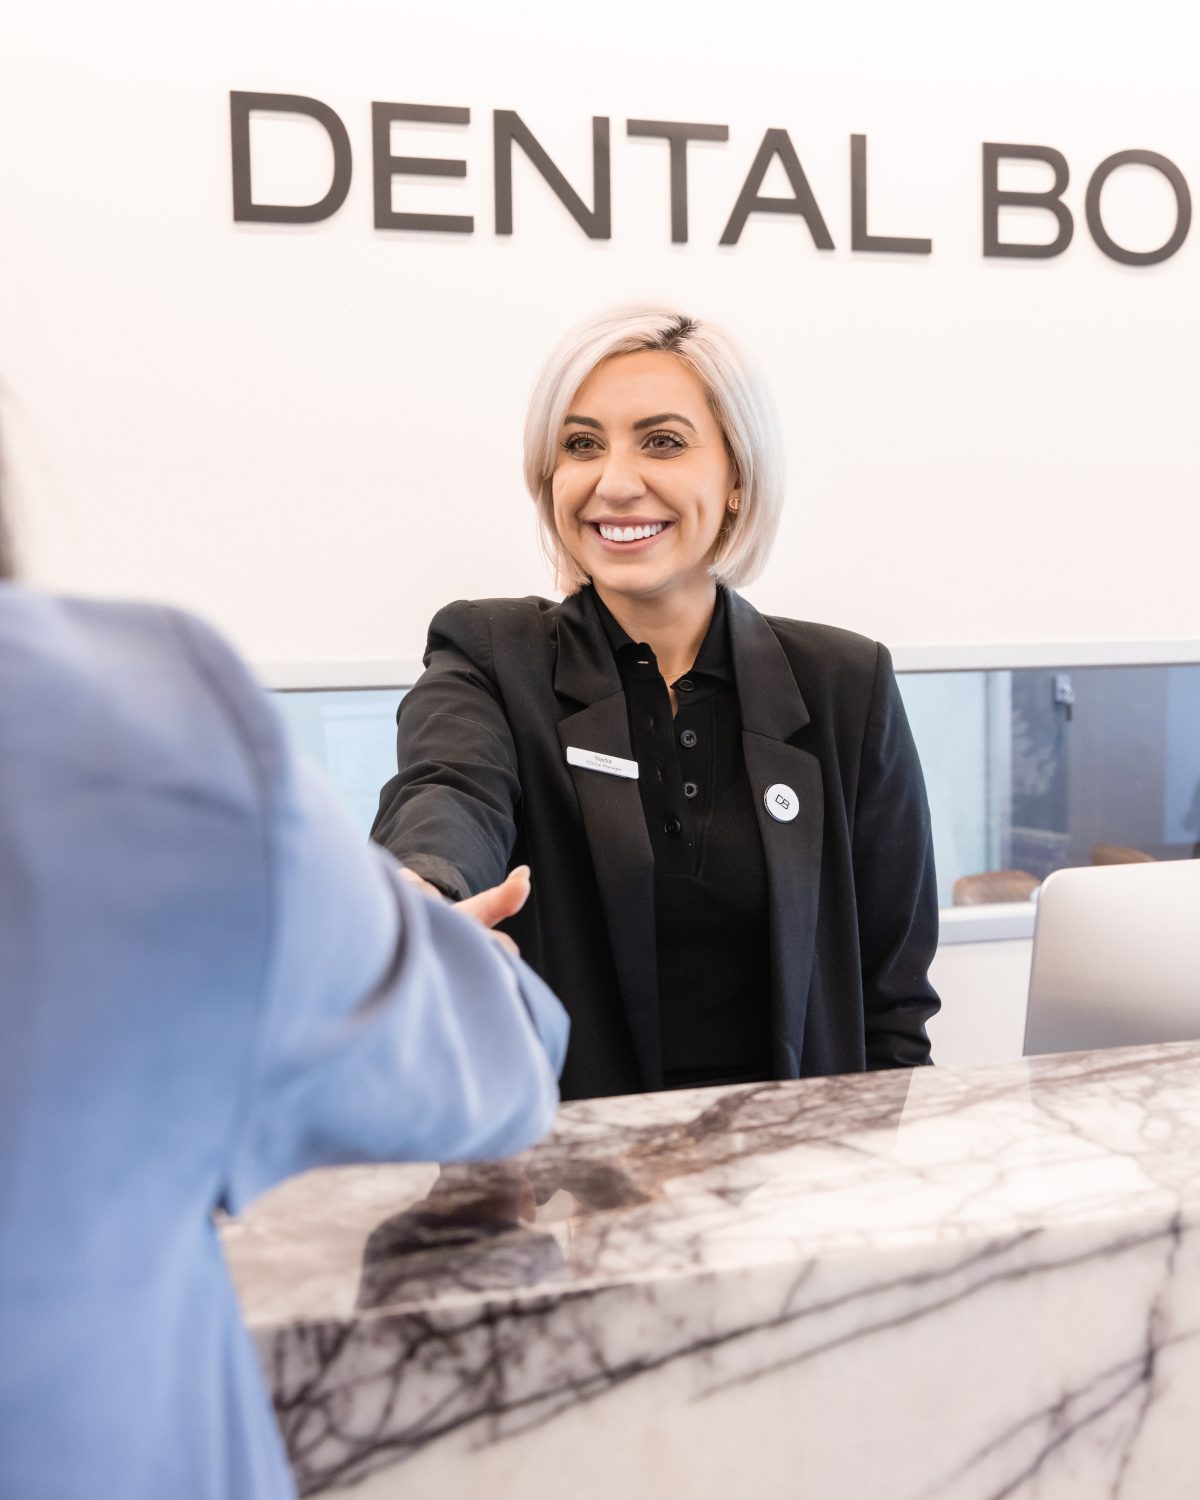 dental boutique greets customers